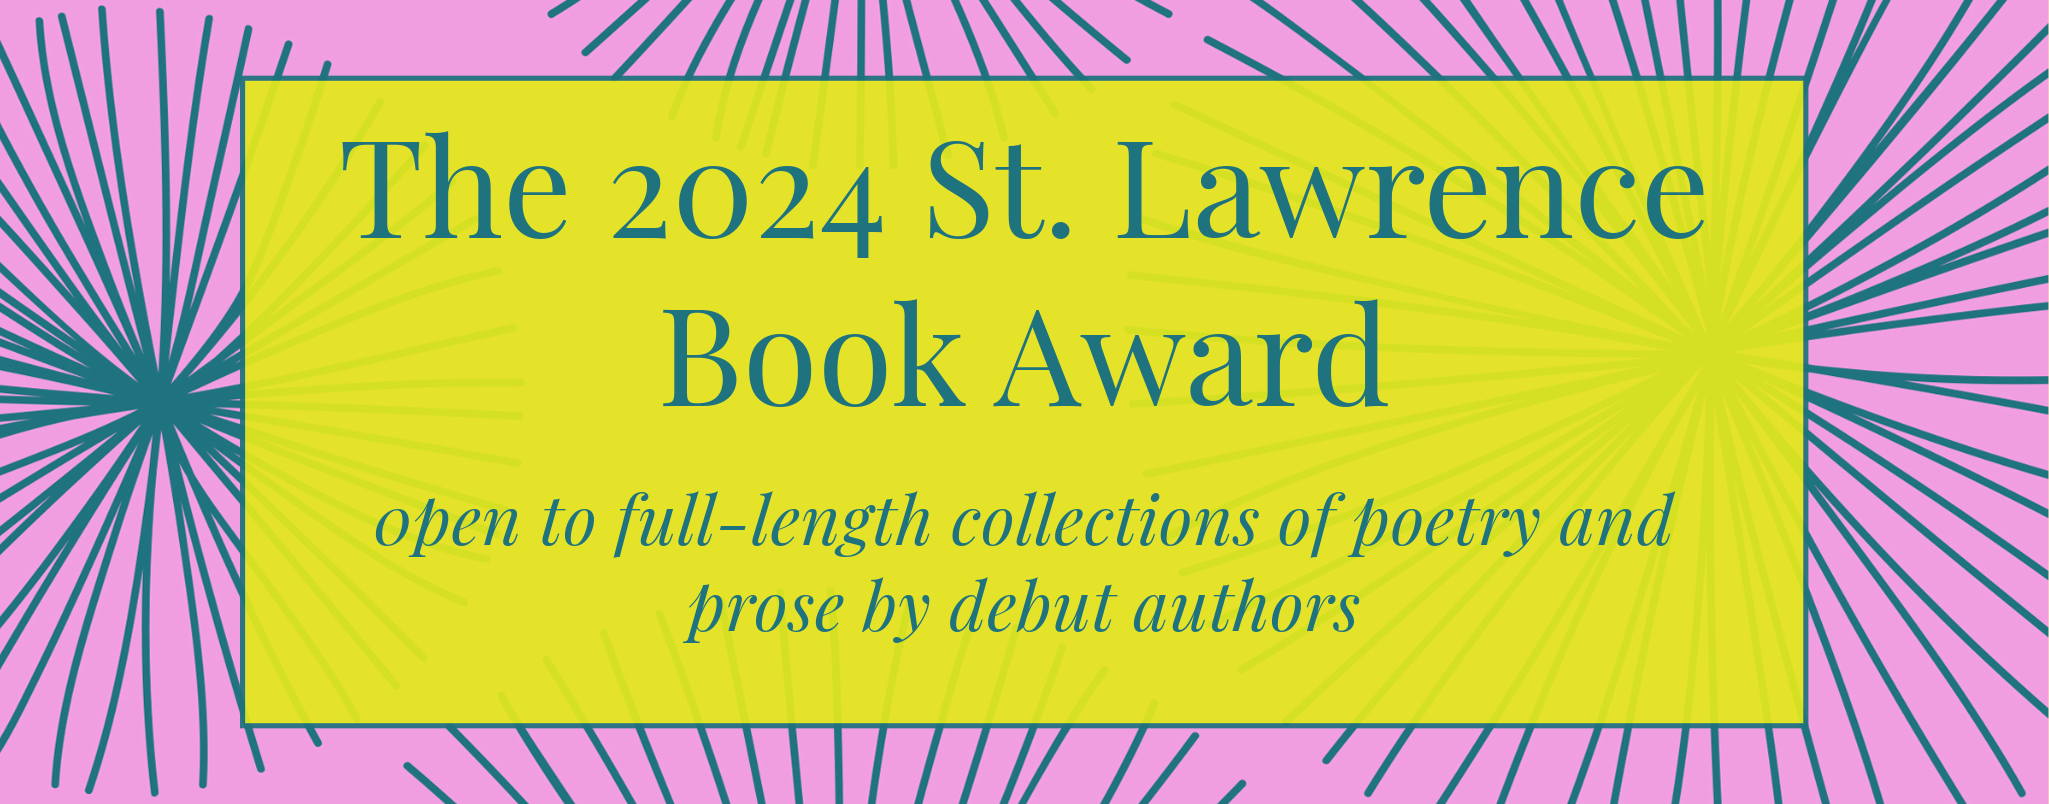 The St. Lawrence Book Award